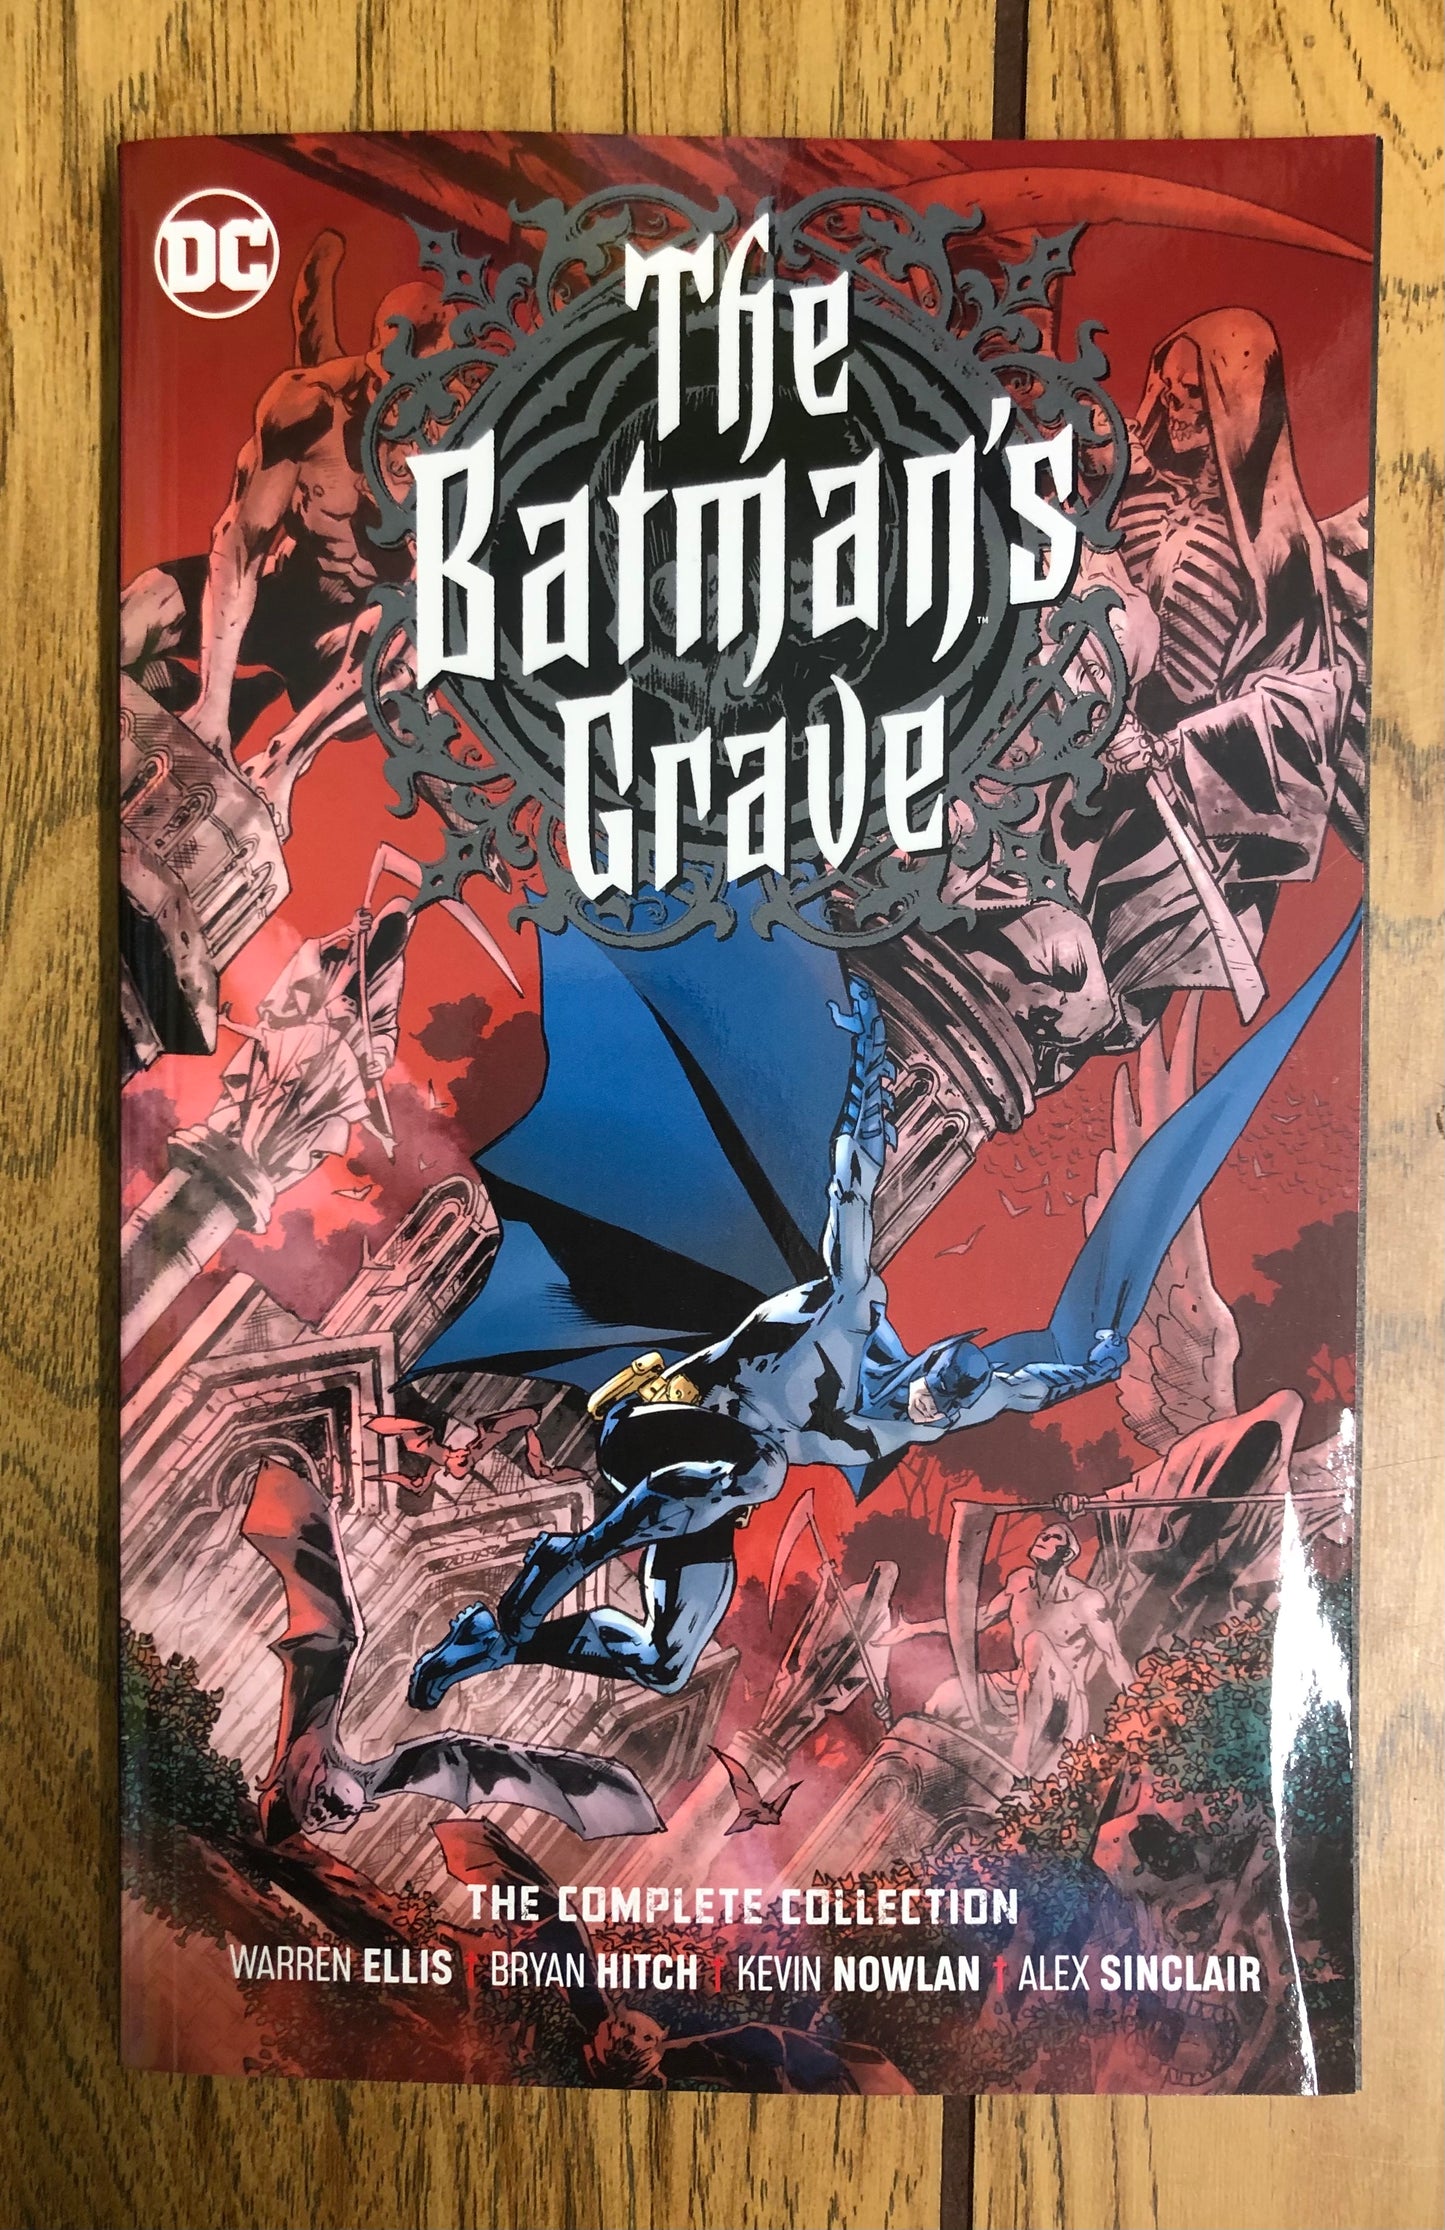 The Batman's Grave: the Complete Collection